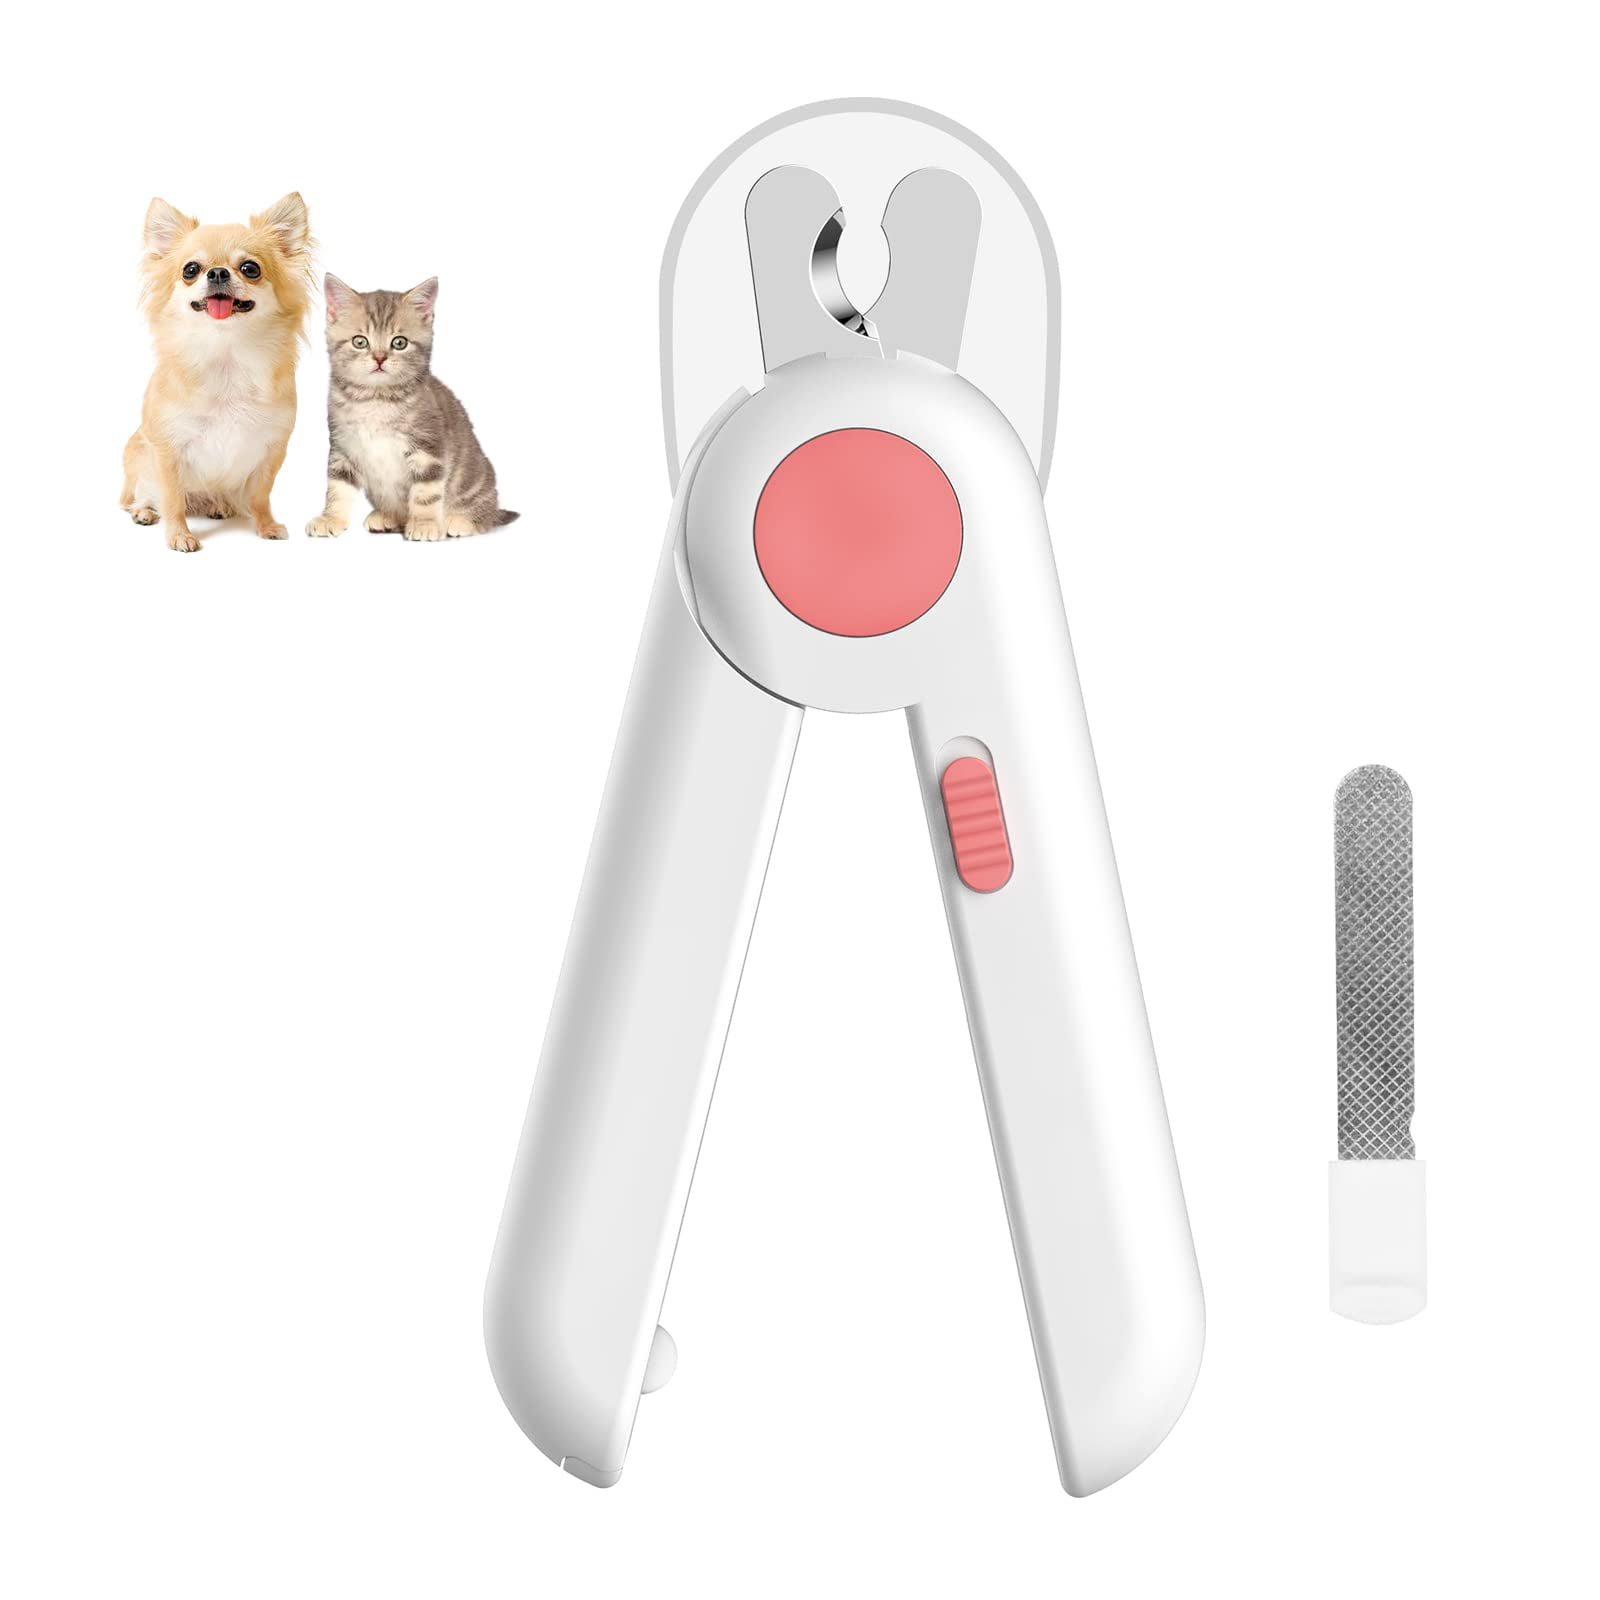 Cat Nail Clipper with Safety Guard Pet Toenail Clippers with Light LED Claw Clipper for Small Dogs with Nail File Comb a4e62a88 d06a 4dcb bf1c 3260735b8b95.f1ac155907a1298d218342788ab6e77a